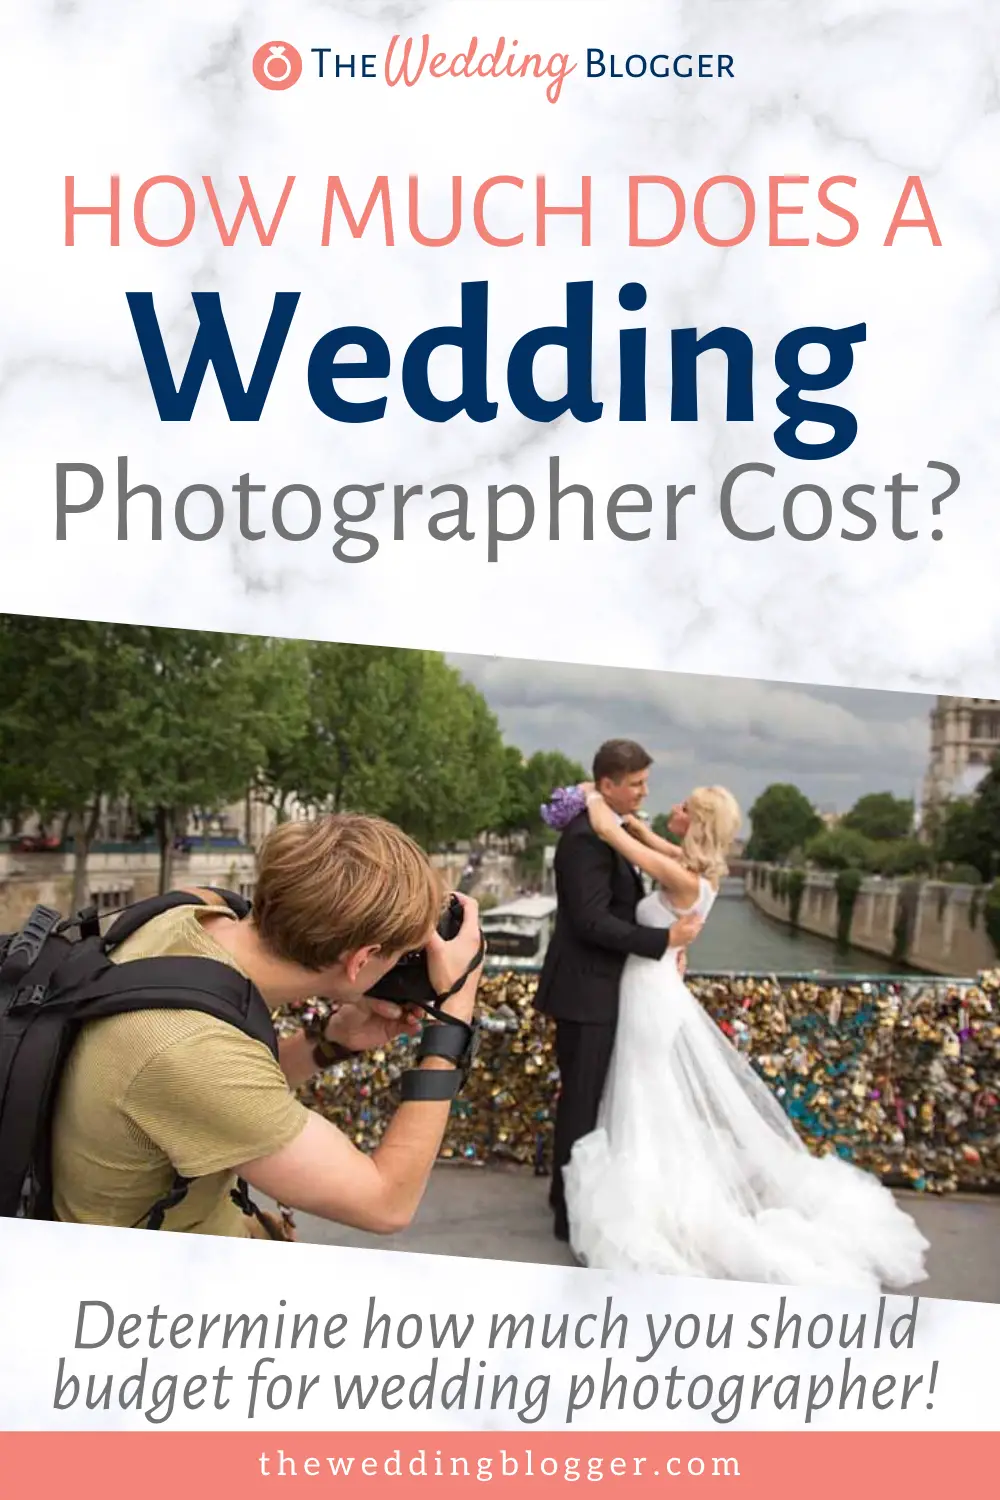 How Much Does a Wedding Photographer Cost?